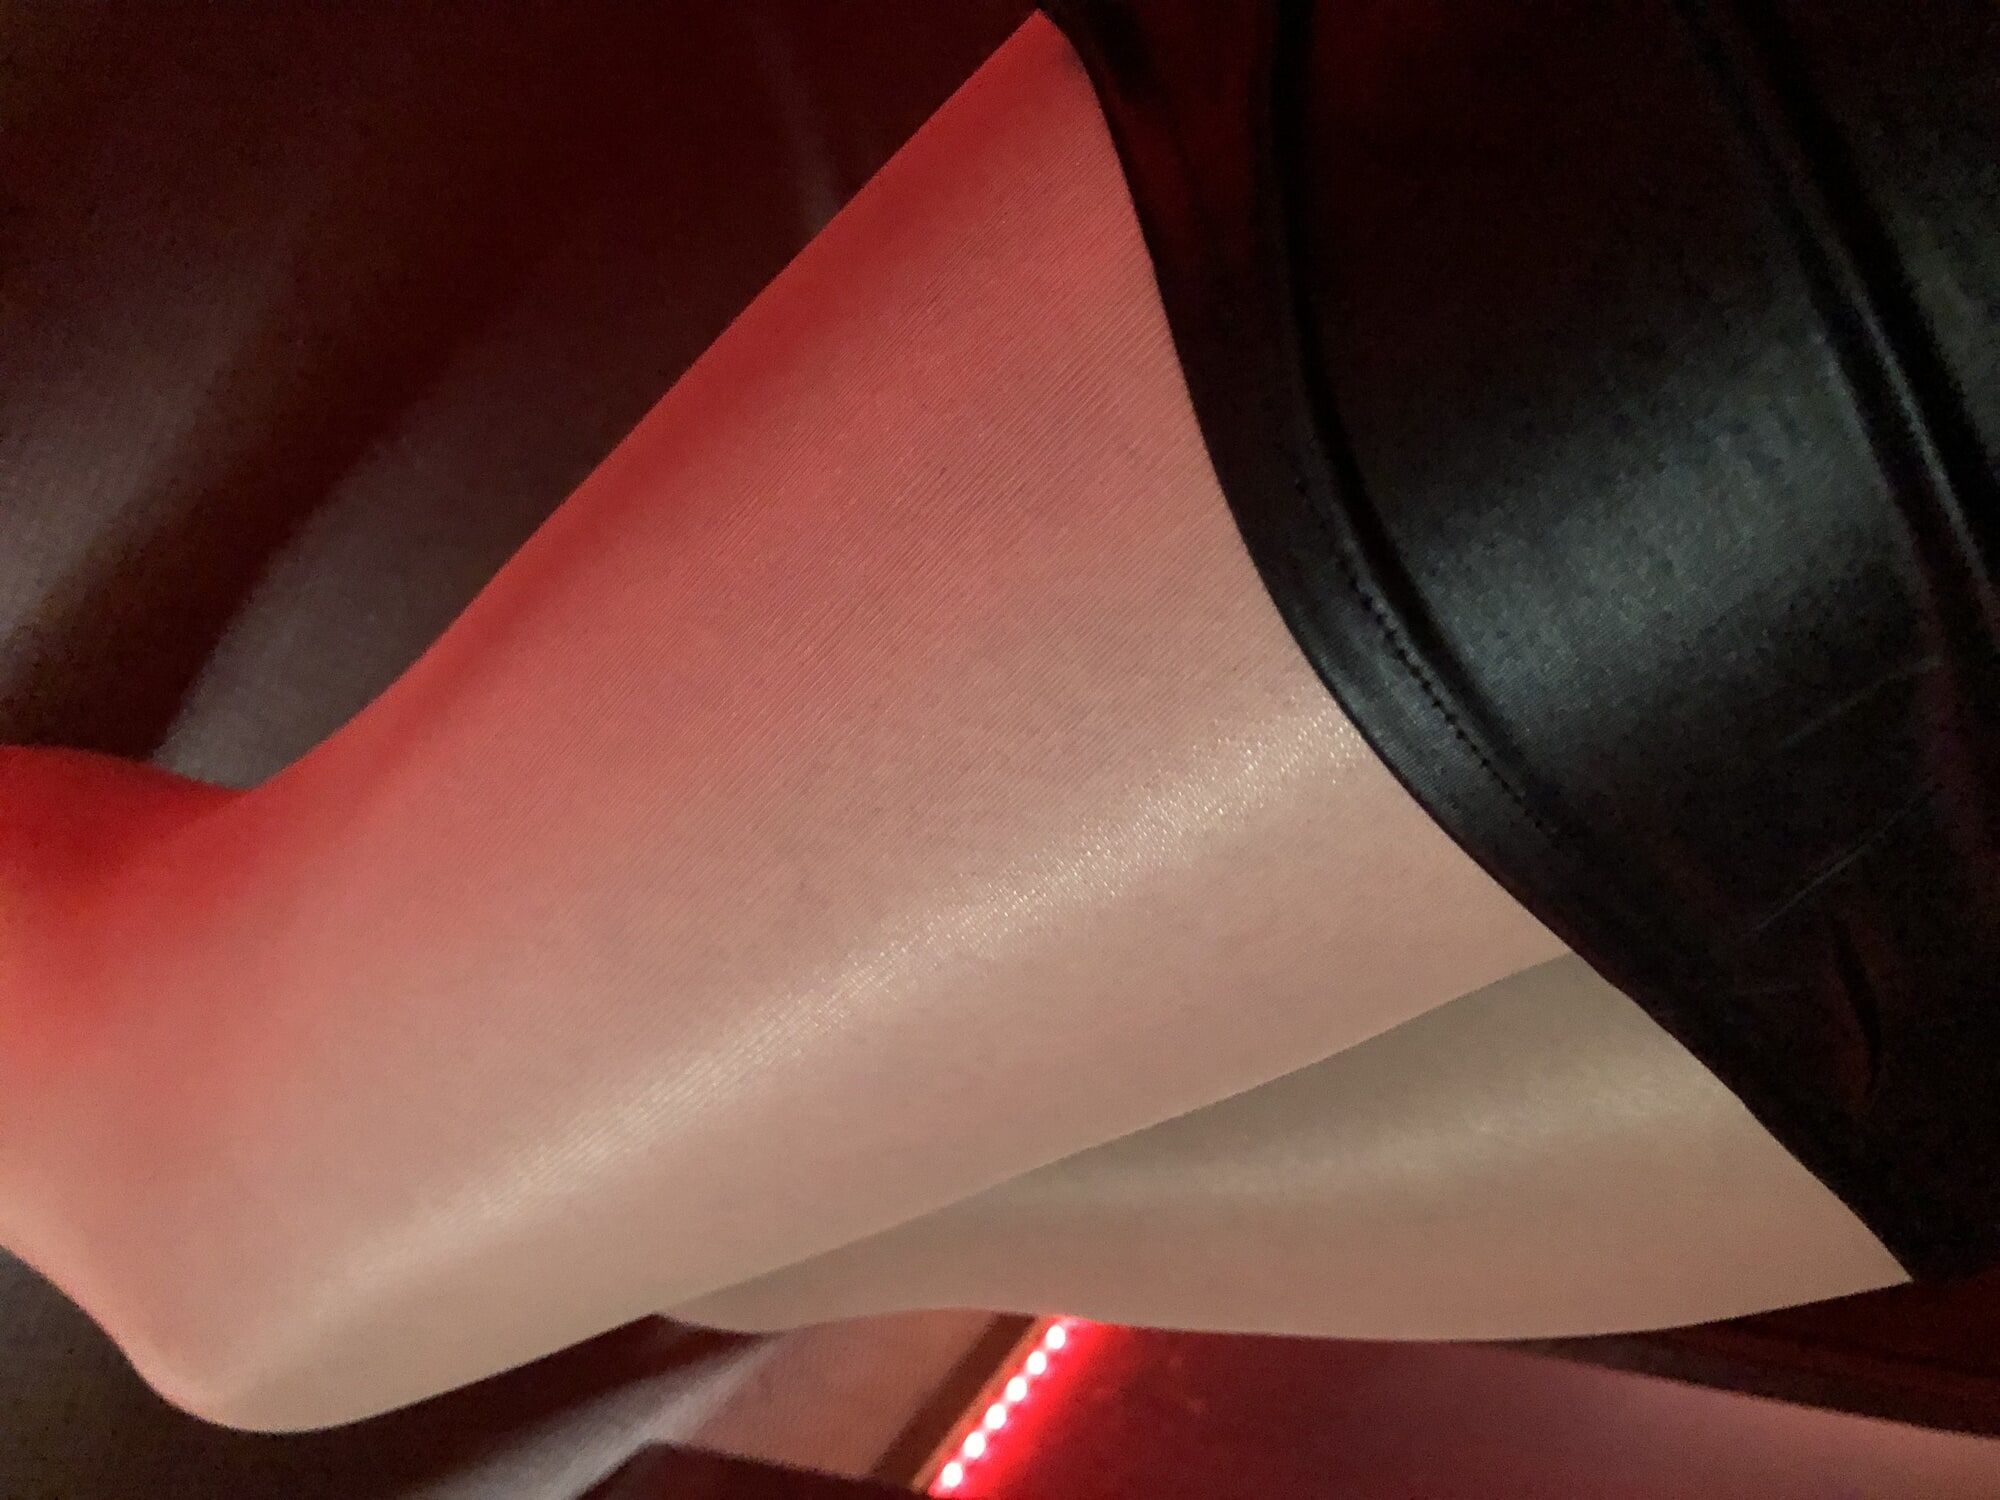 My legs looks so hot on pantyhose and high heels! #16